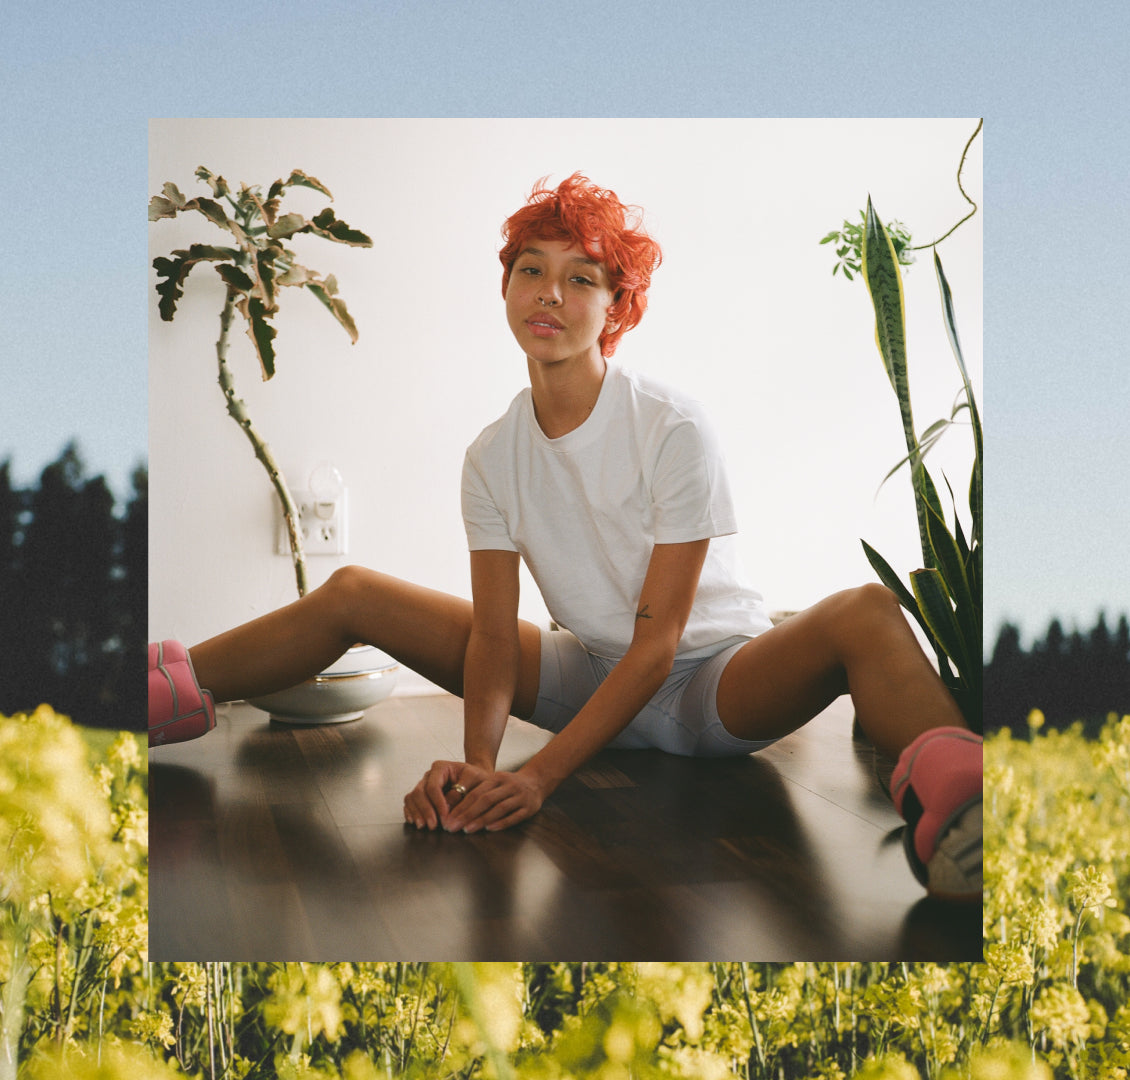 Gender neutral afab person with red orange hair, sitting on floor, surrounded by plants